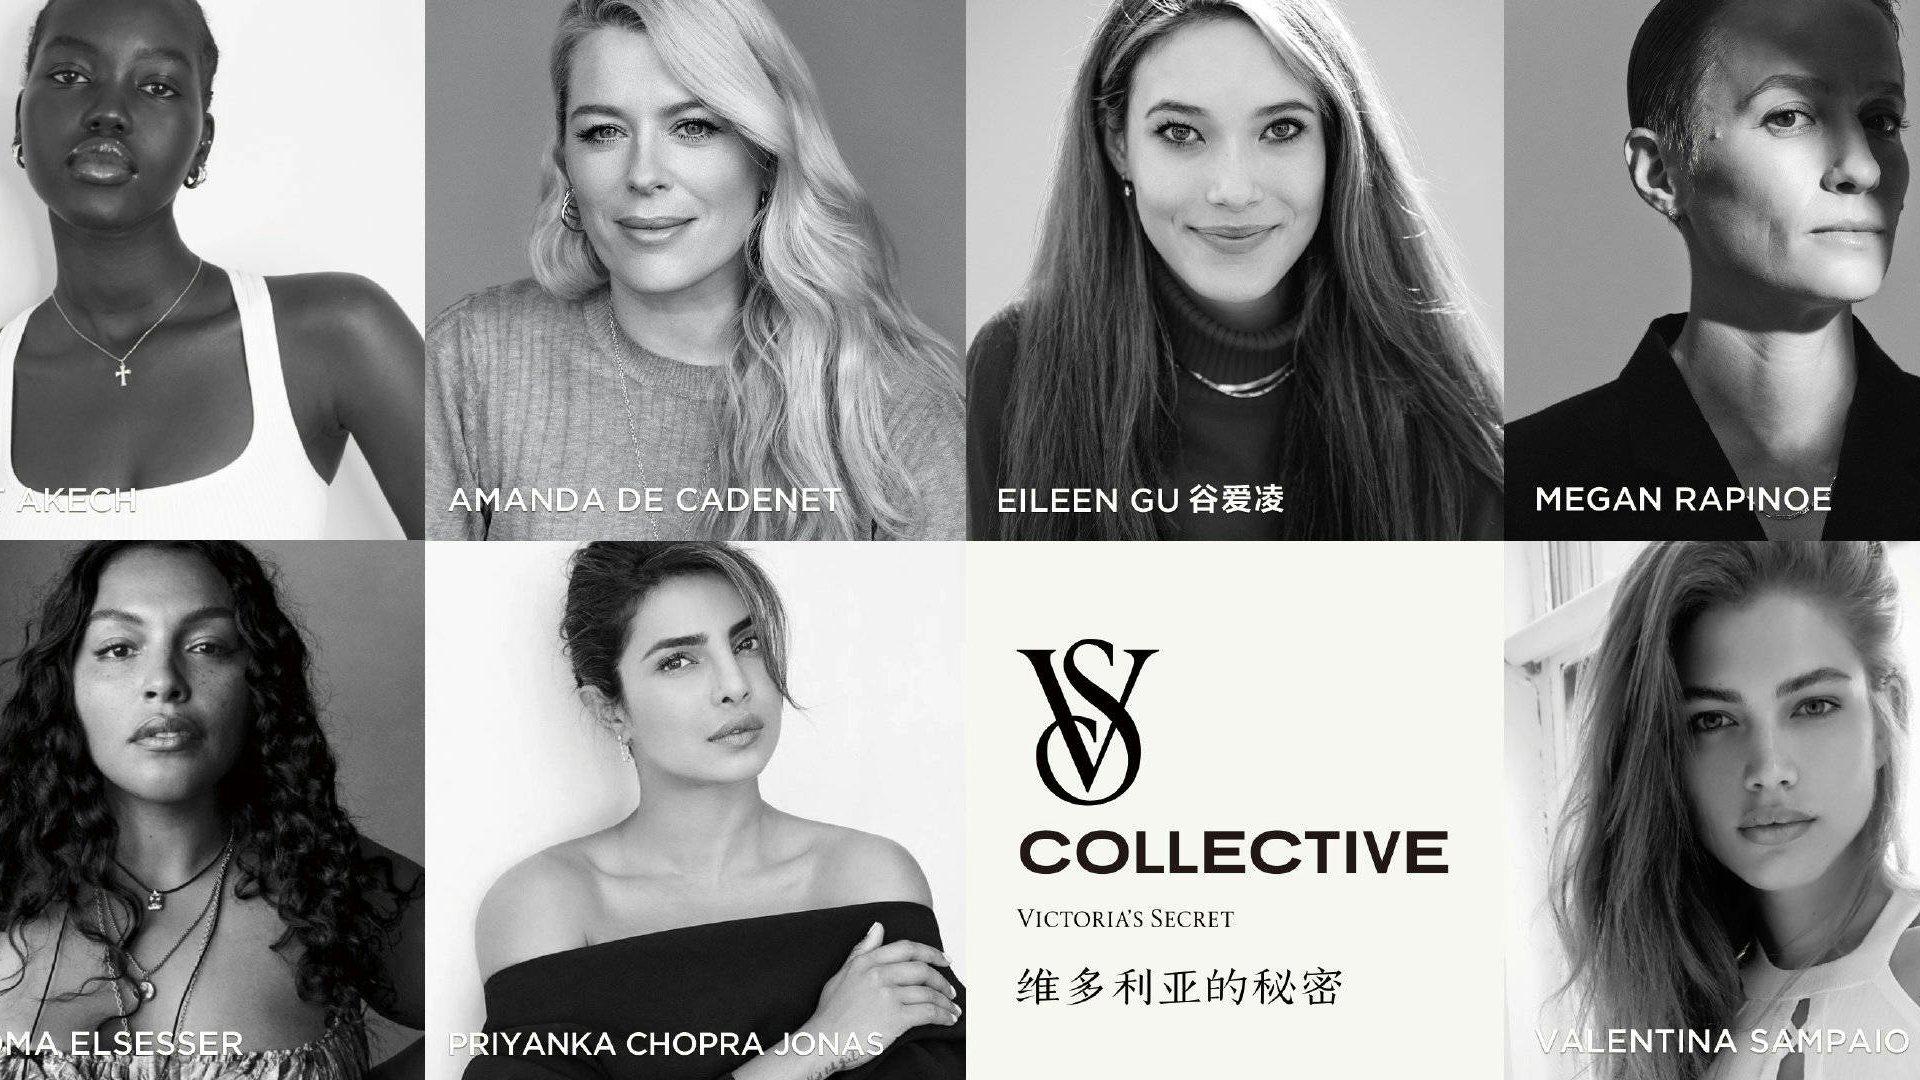 Victoria’s Secret has revealed that the freestyle skier, Eileen Gu, will be one of seven new figureheads replacing the company’s sexist VS Angels. Photo: Victoria's Secret's Weibo